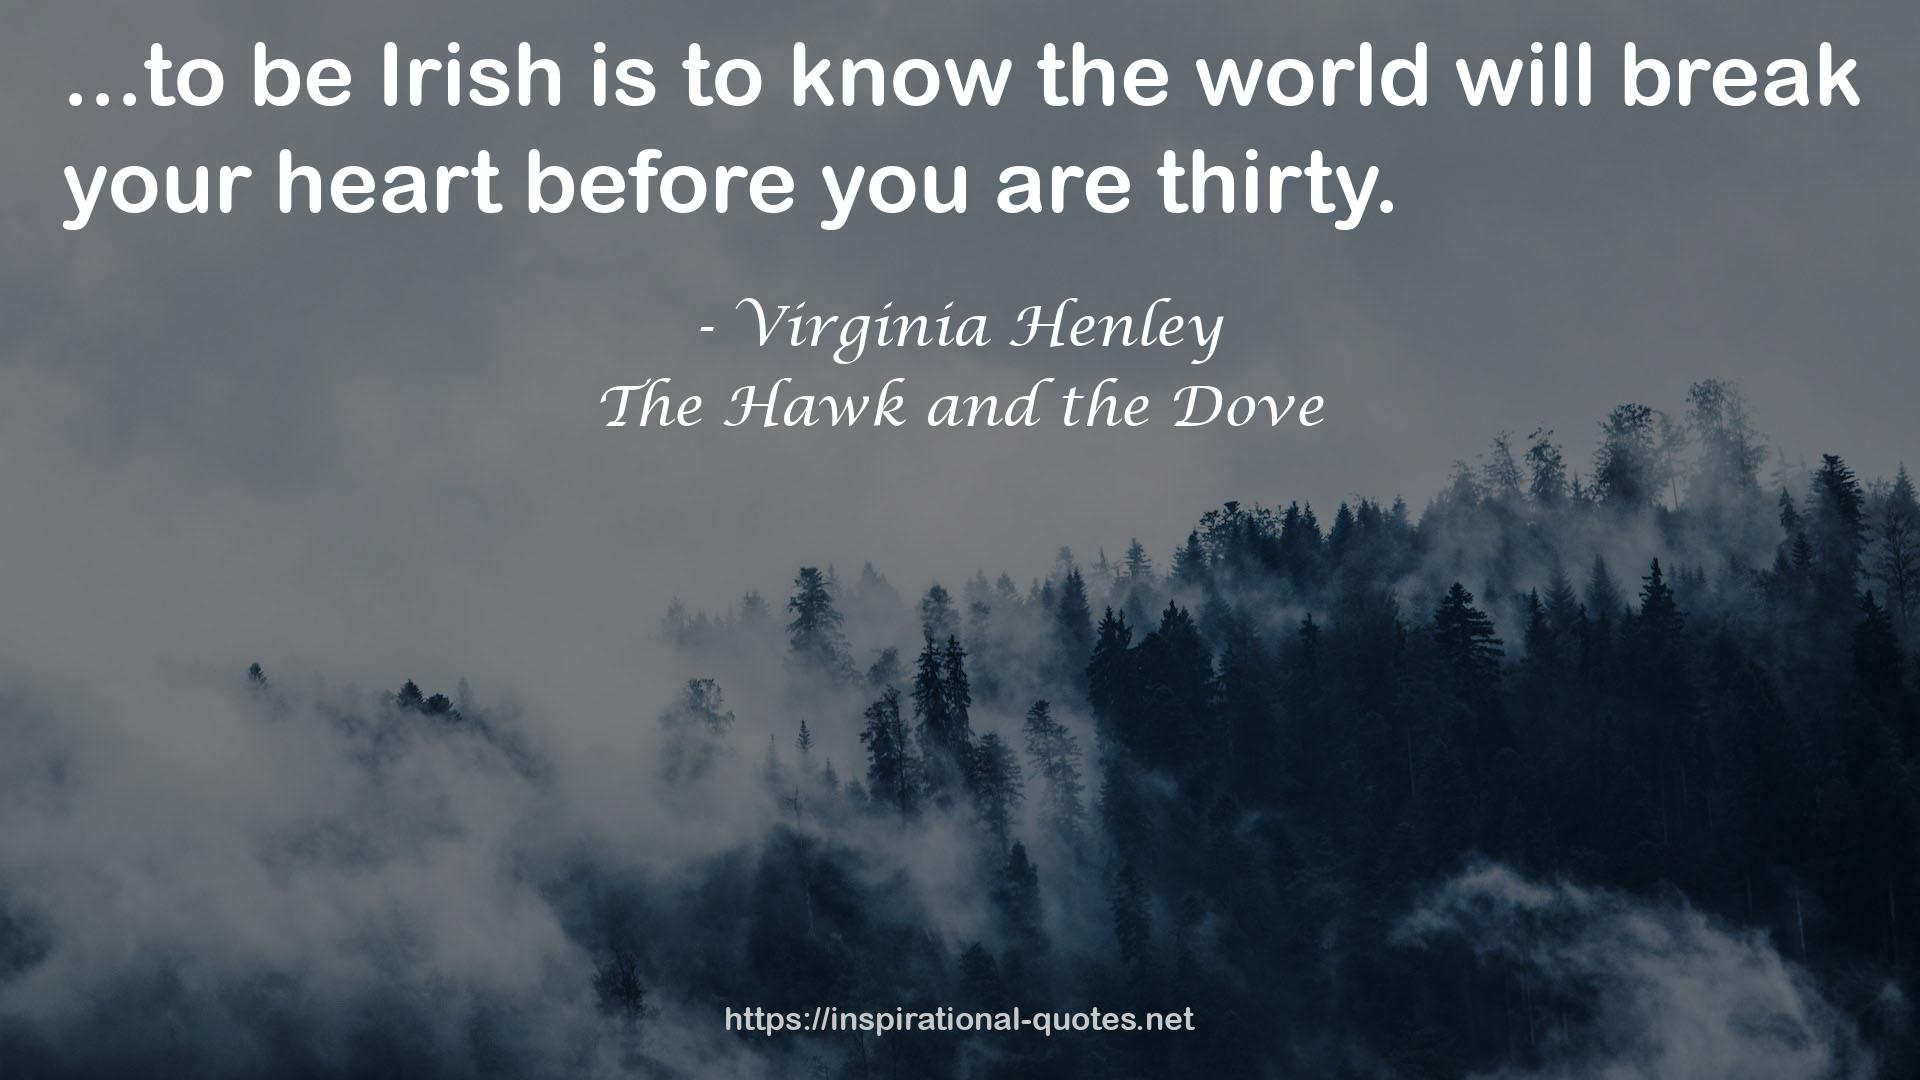 The Hawk and the Dove QUOTES